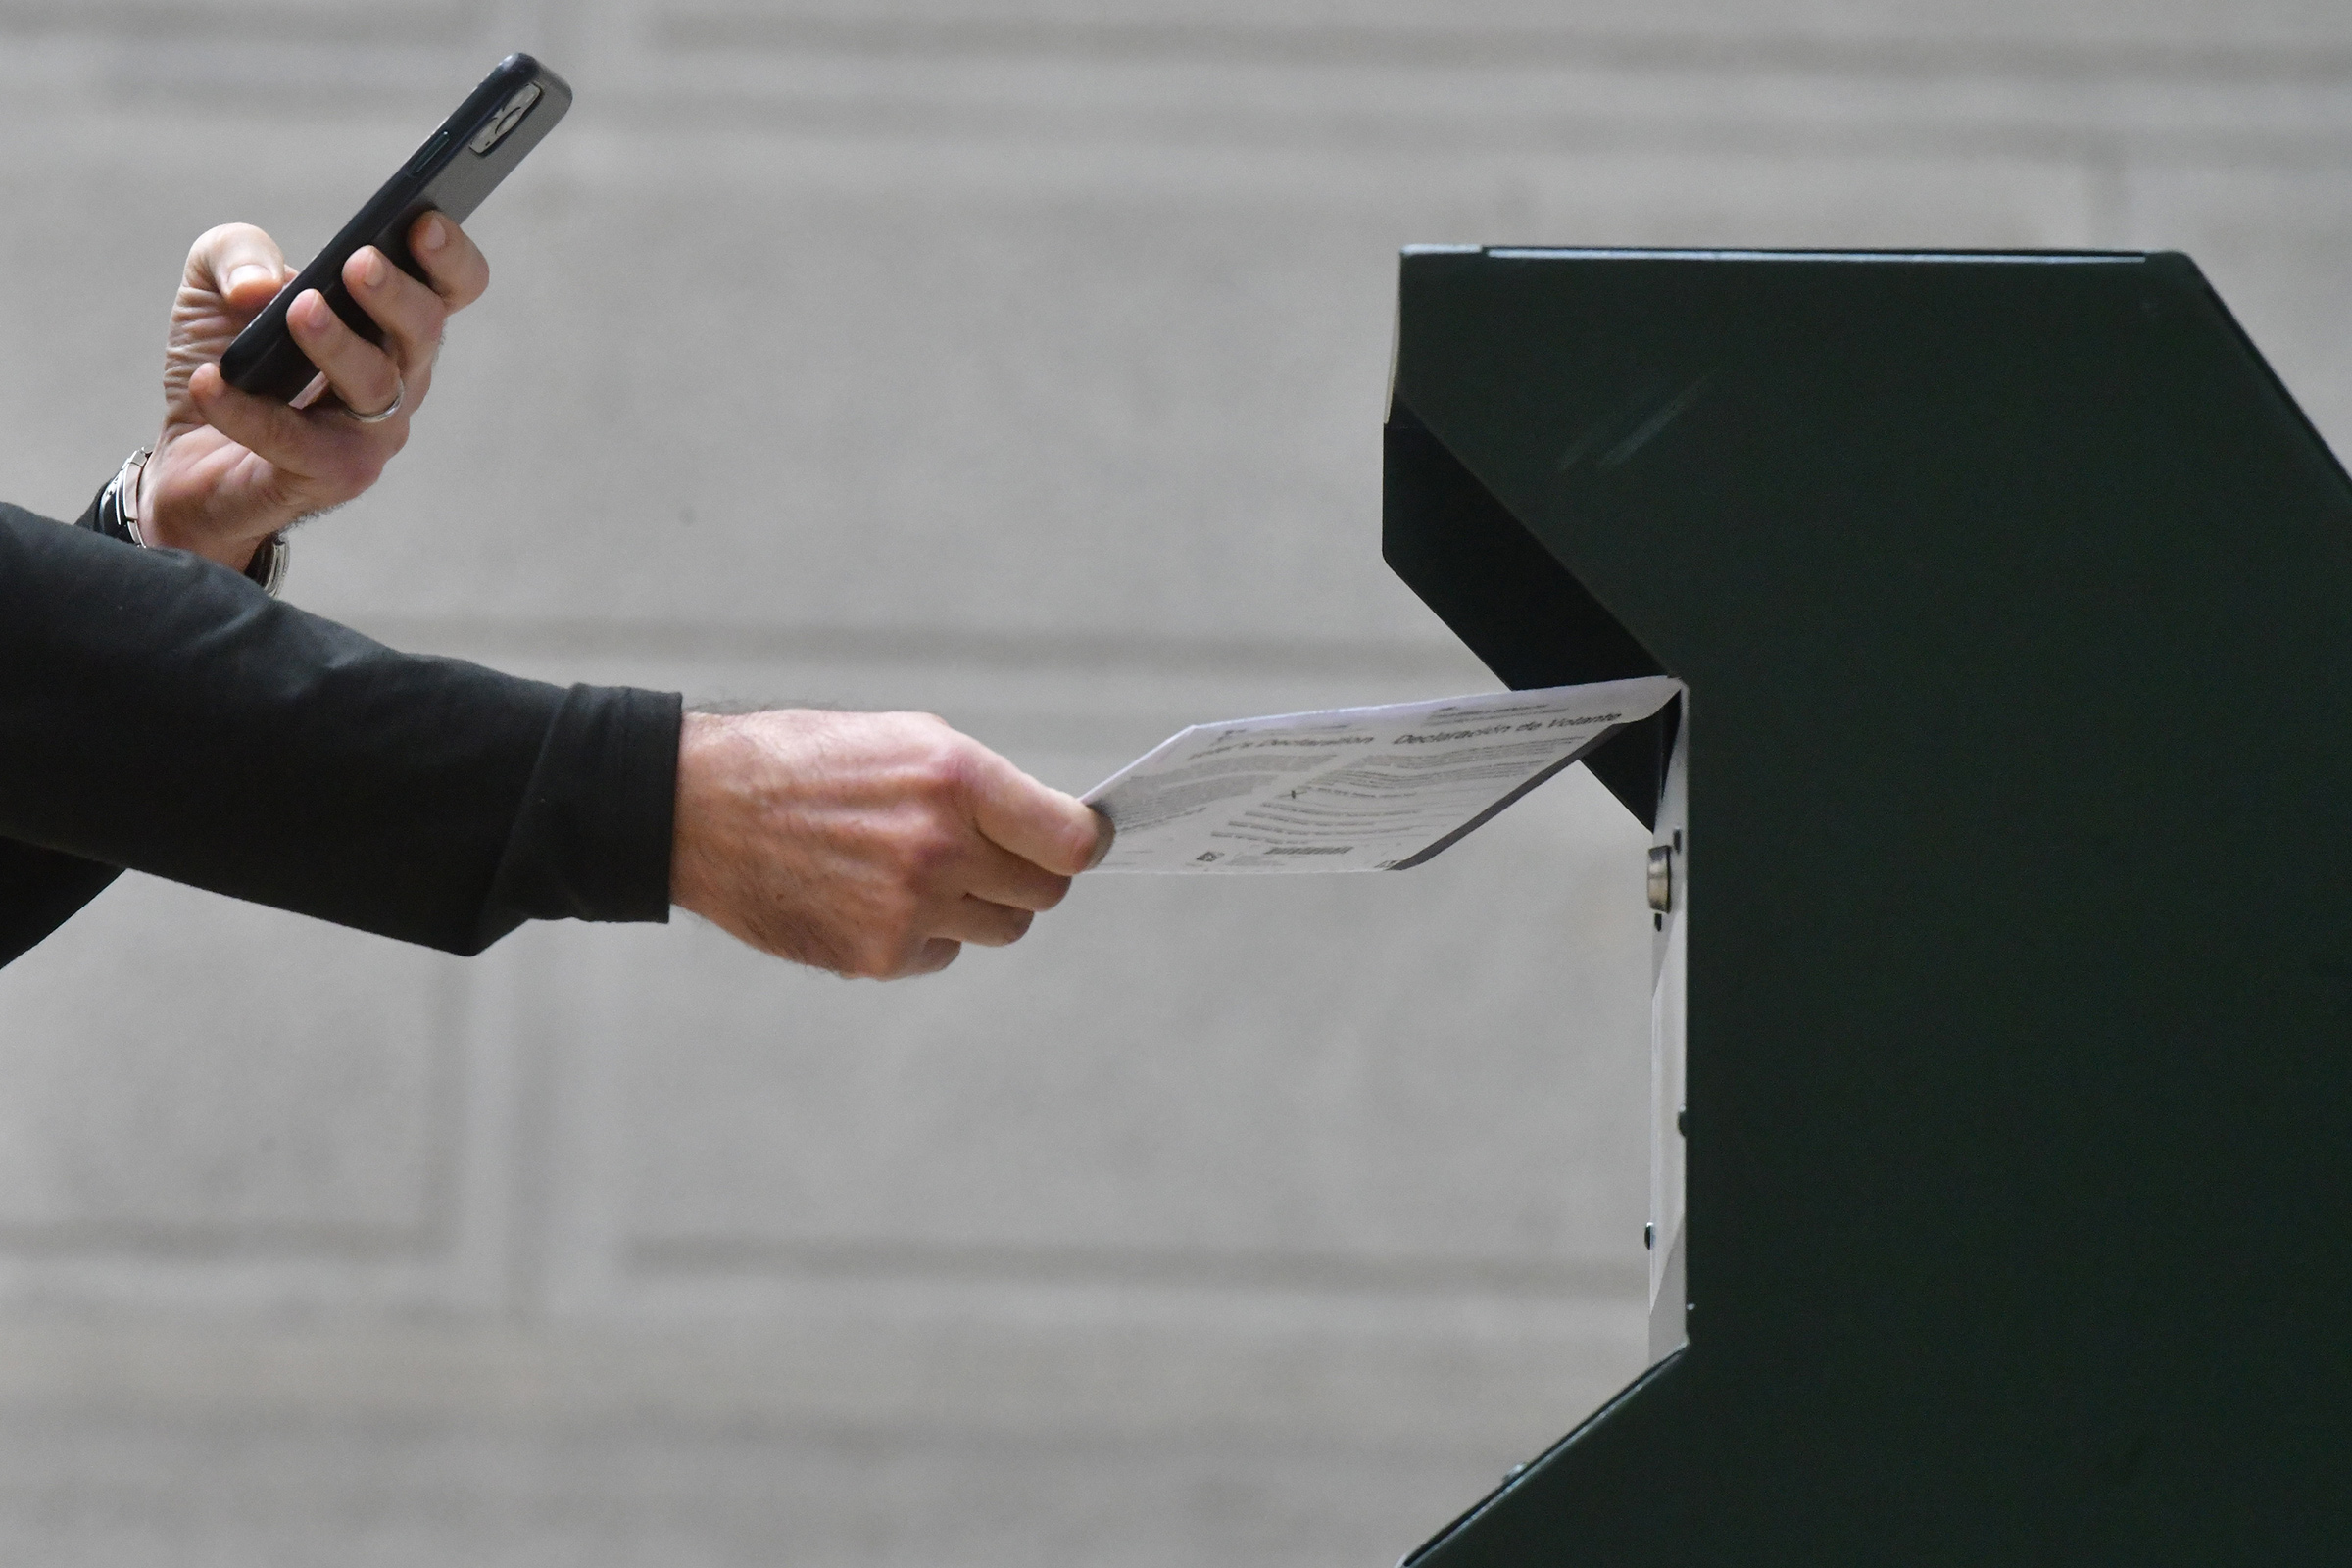 A man photographs himself depositing his ballot in an official ballot drop box outside of Philadelphia City Hall on Oct. 27. Misinformation about voting has been spreading online